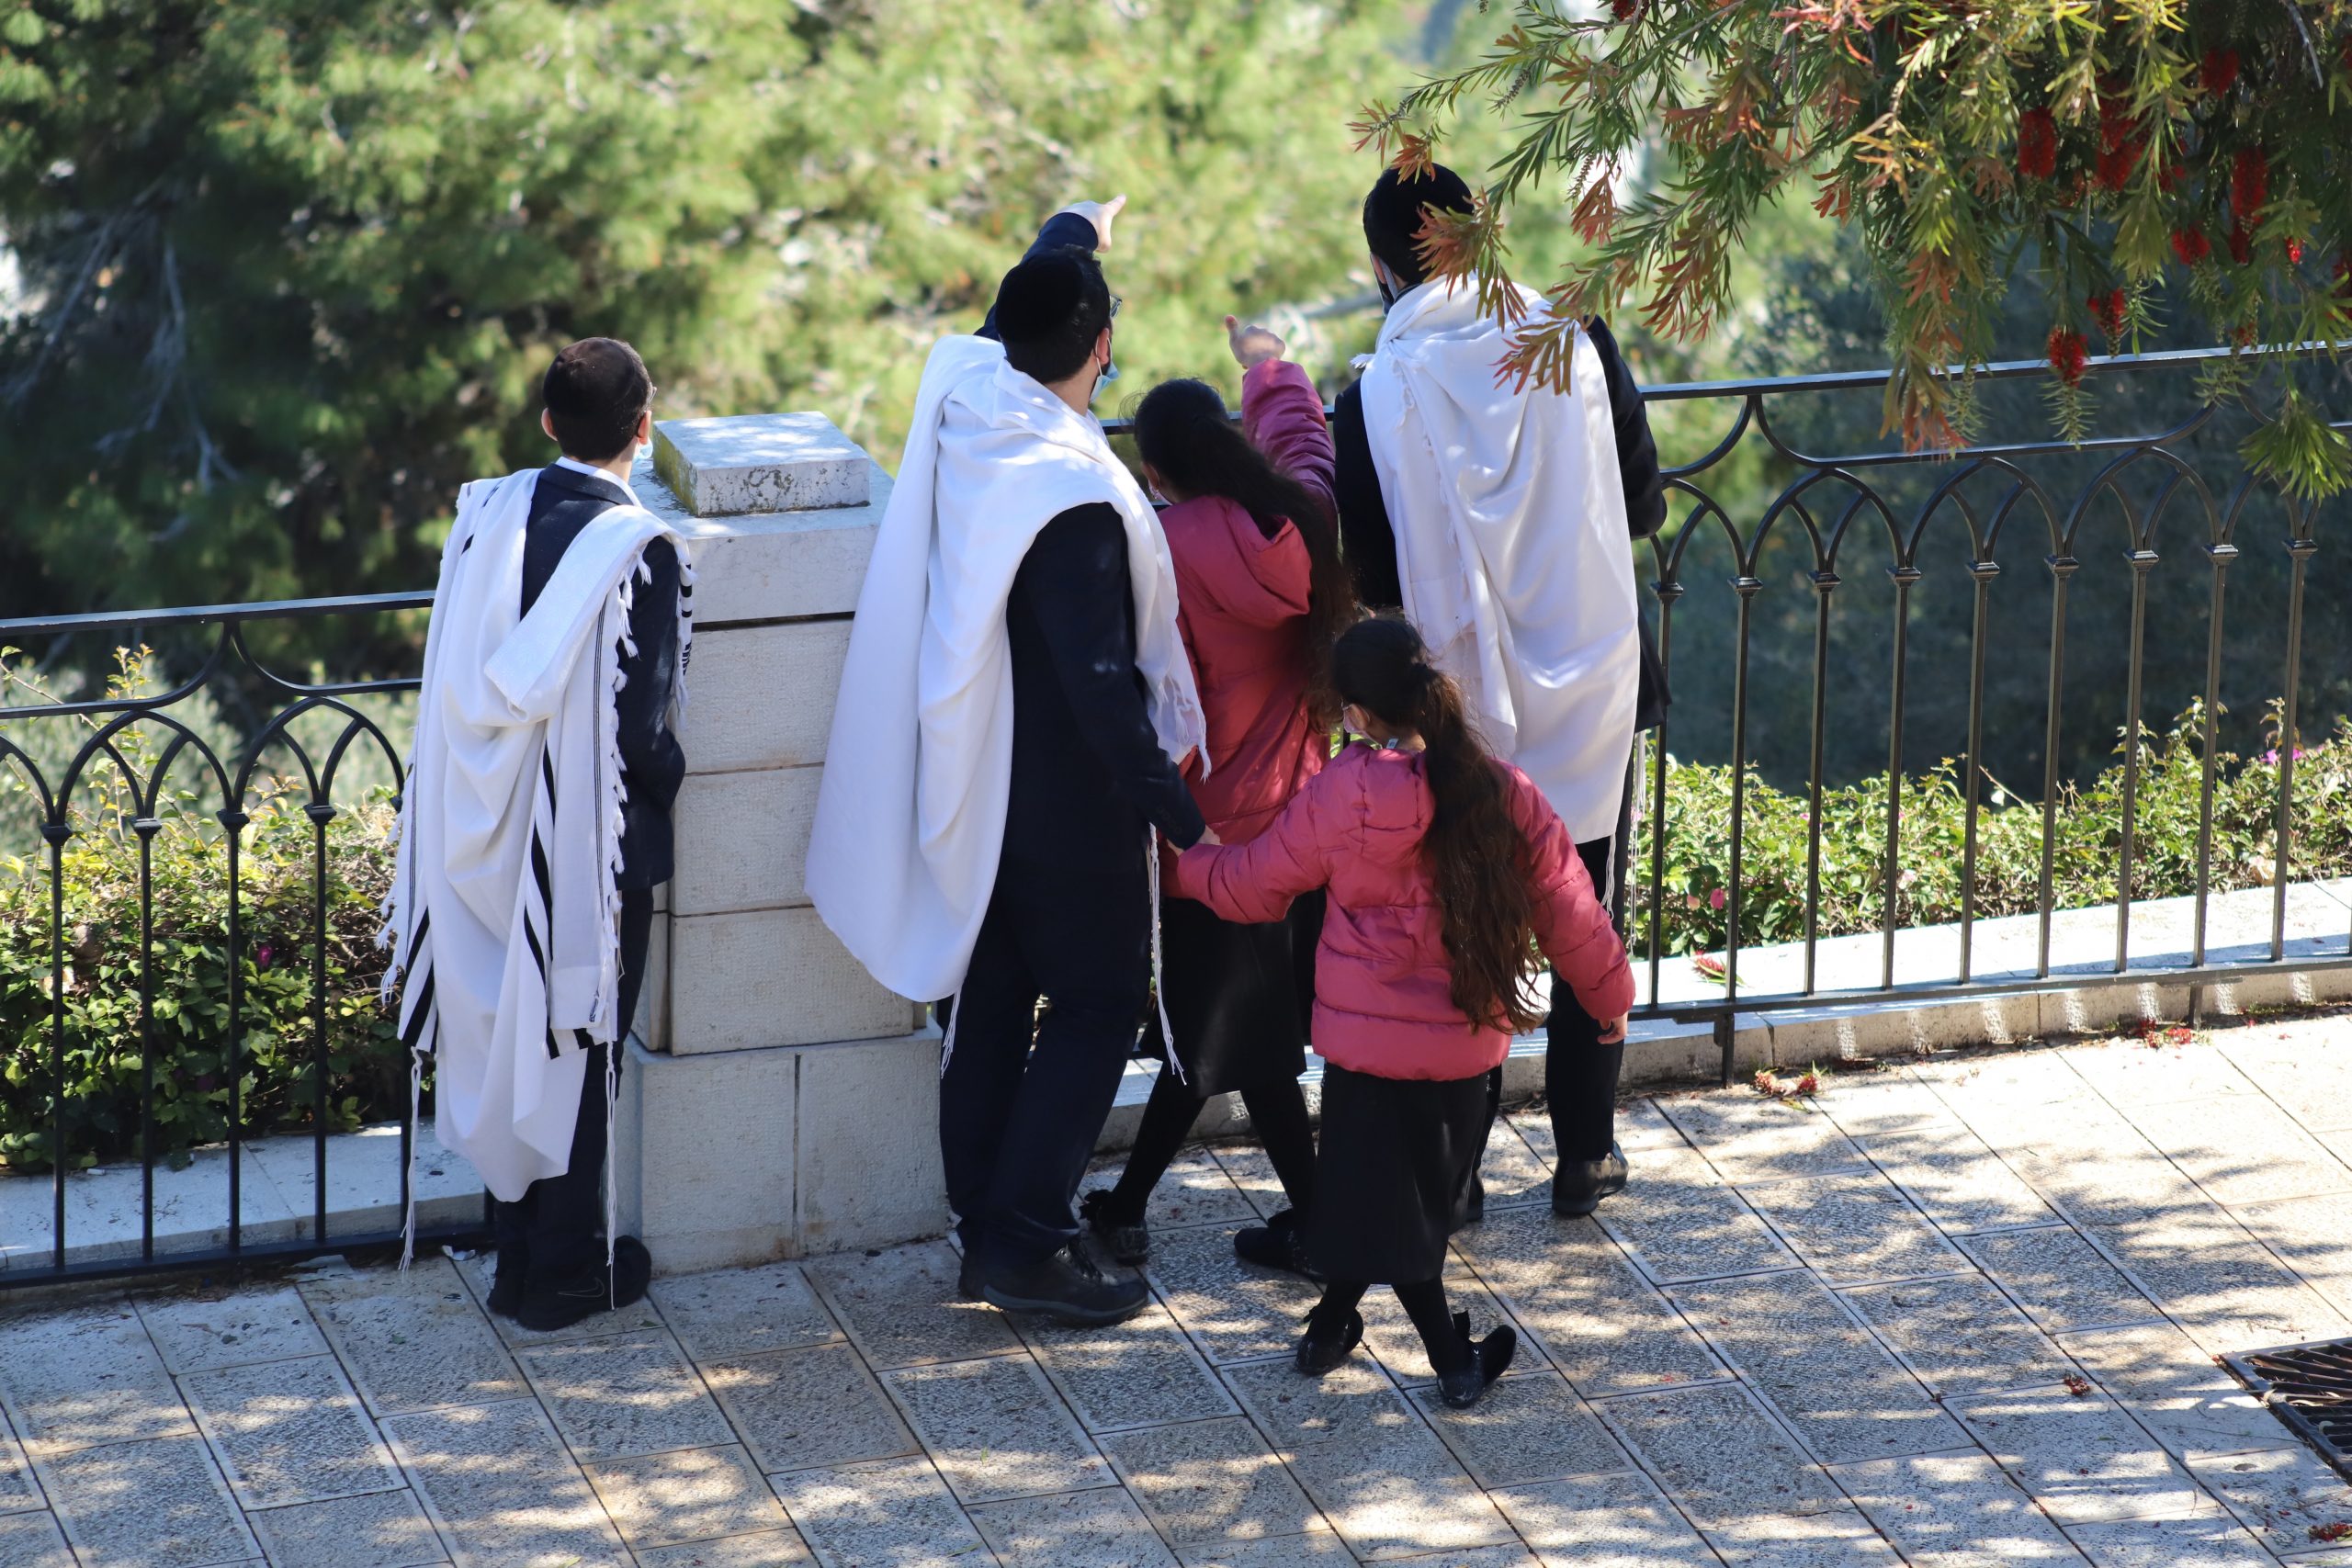 Israeli society is increasingly divided, view of haredim worsens